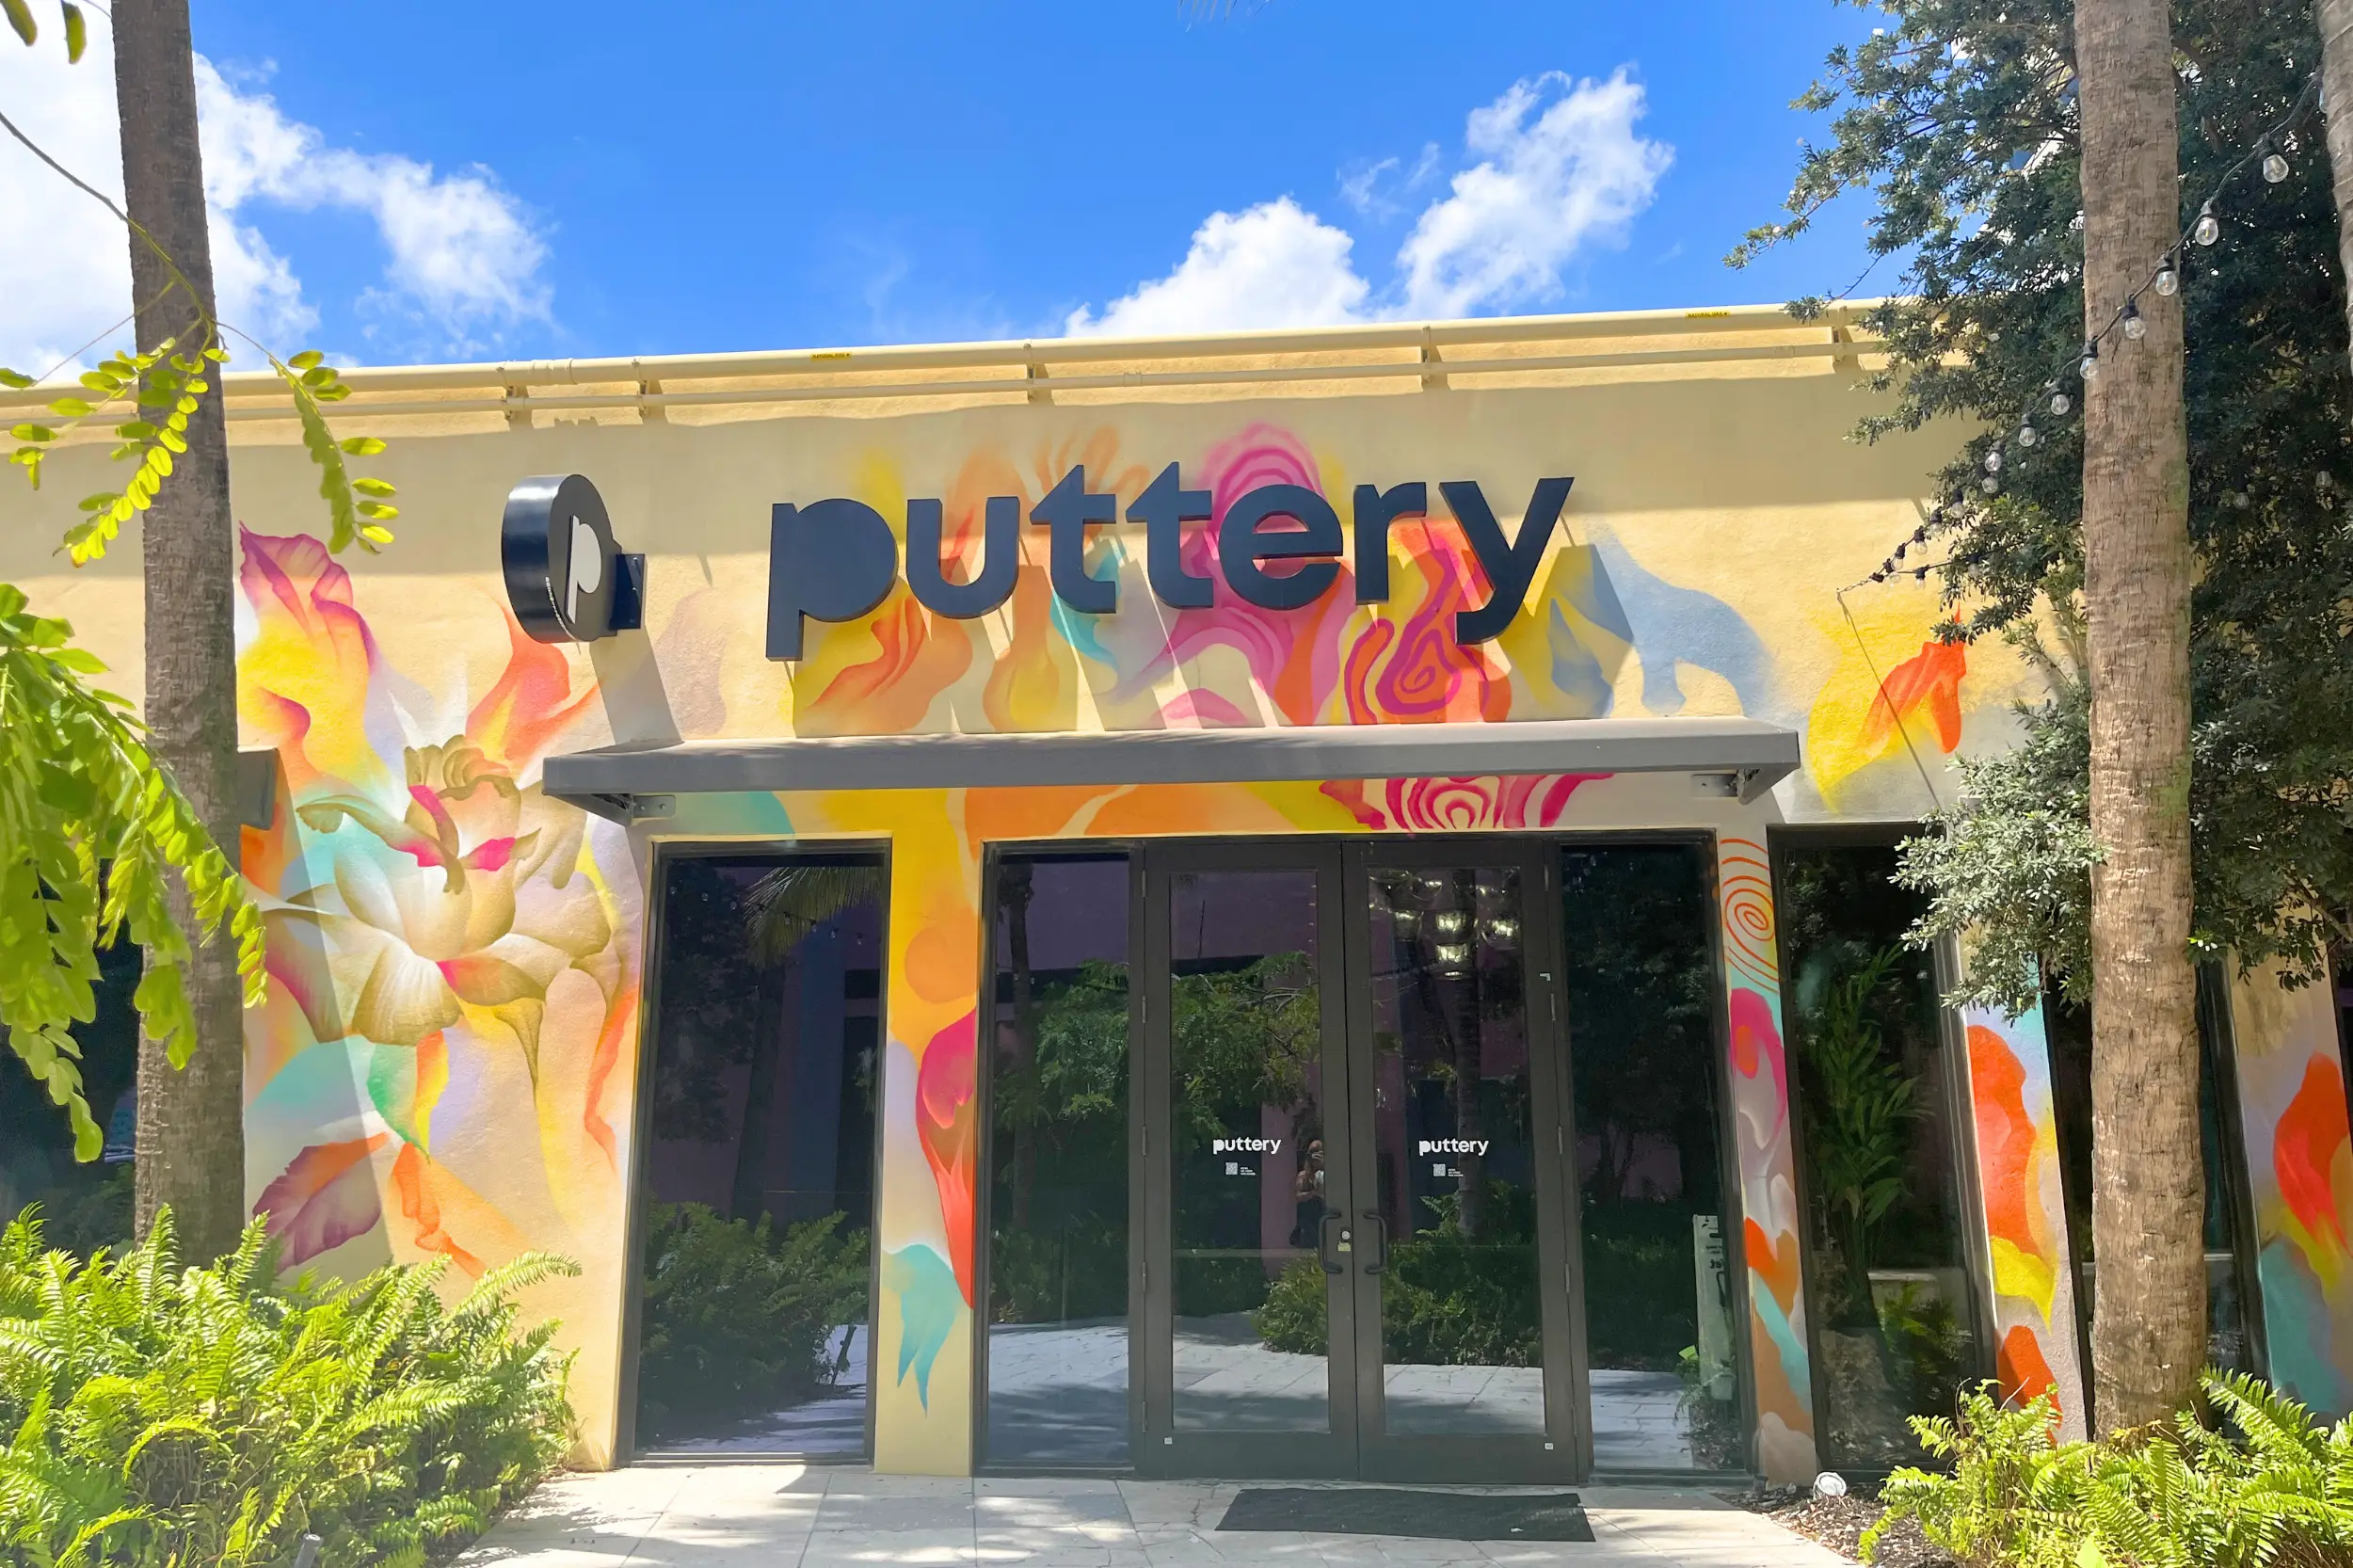 Puttery Miami entrance mural in Wynwood Walls, which is a place for indoor mini golf Miami, great for anyone 21+.